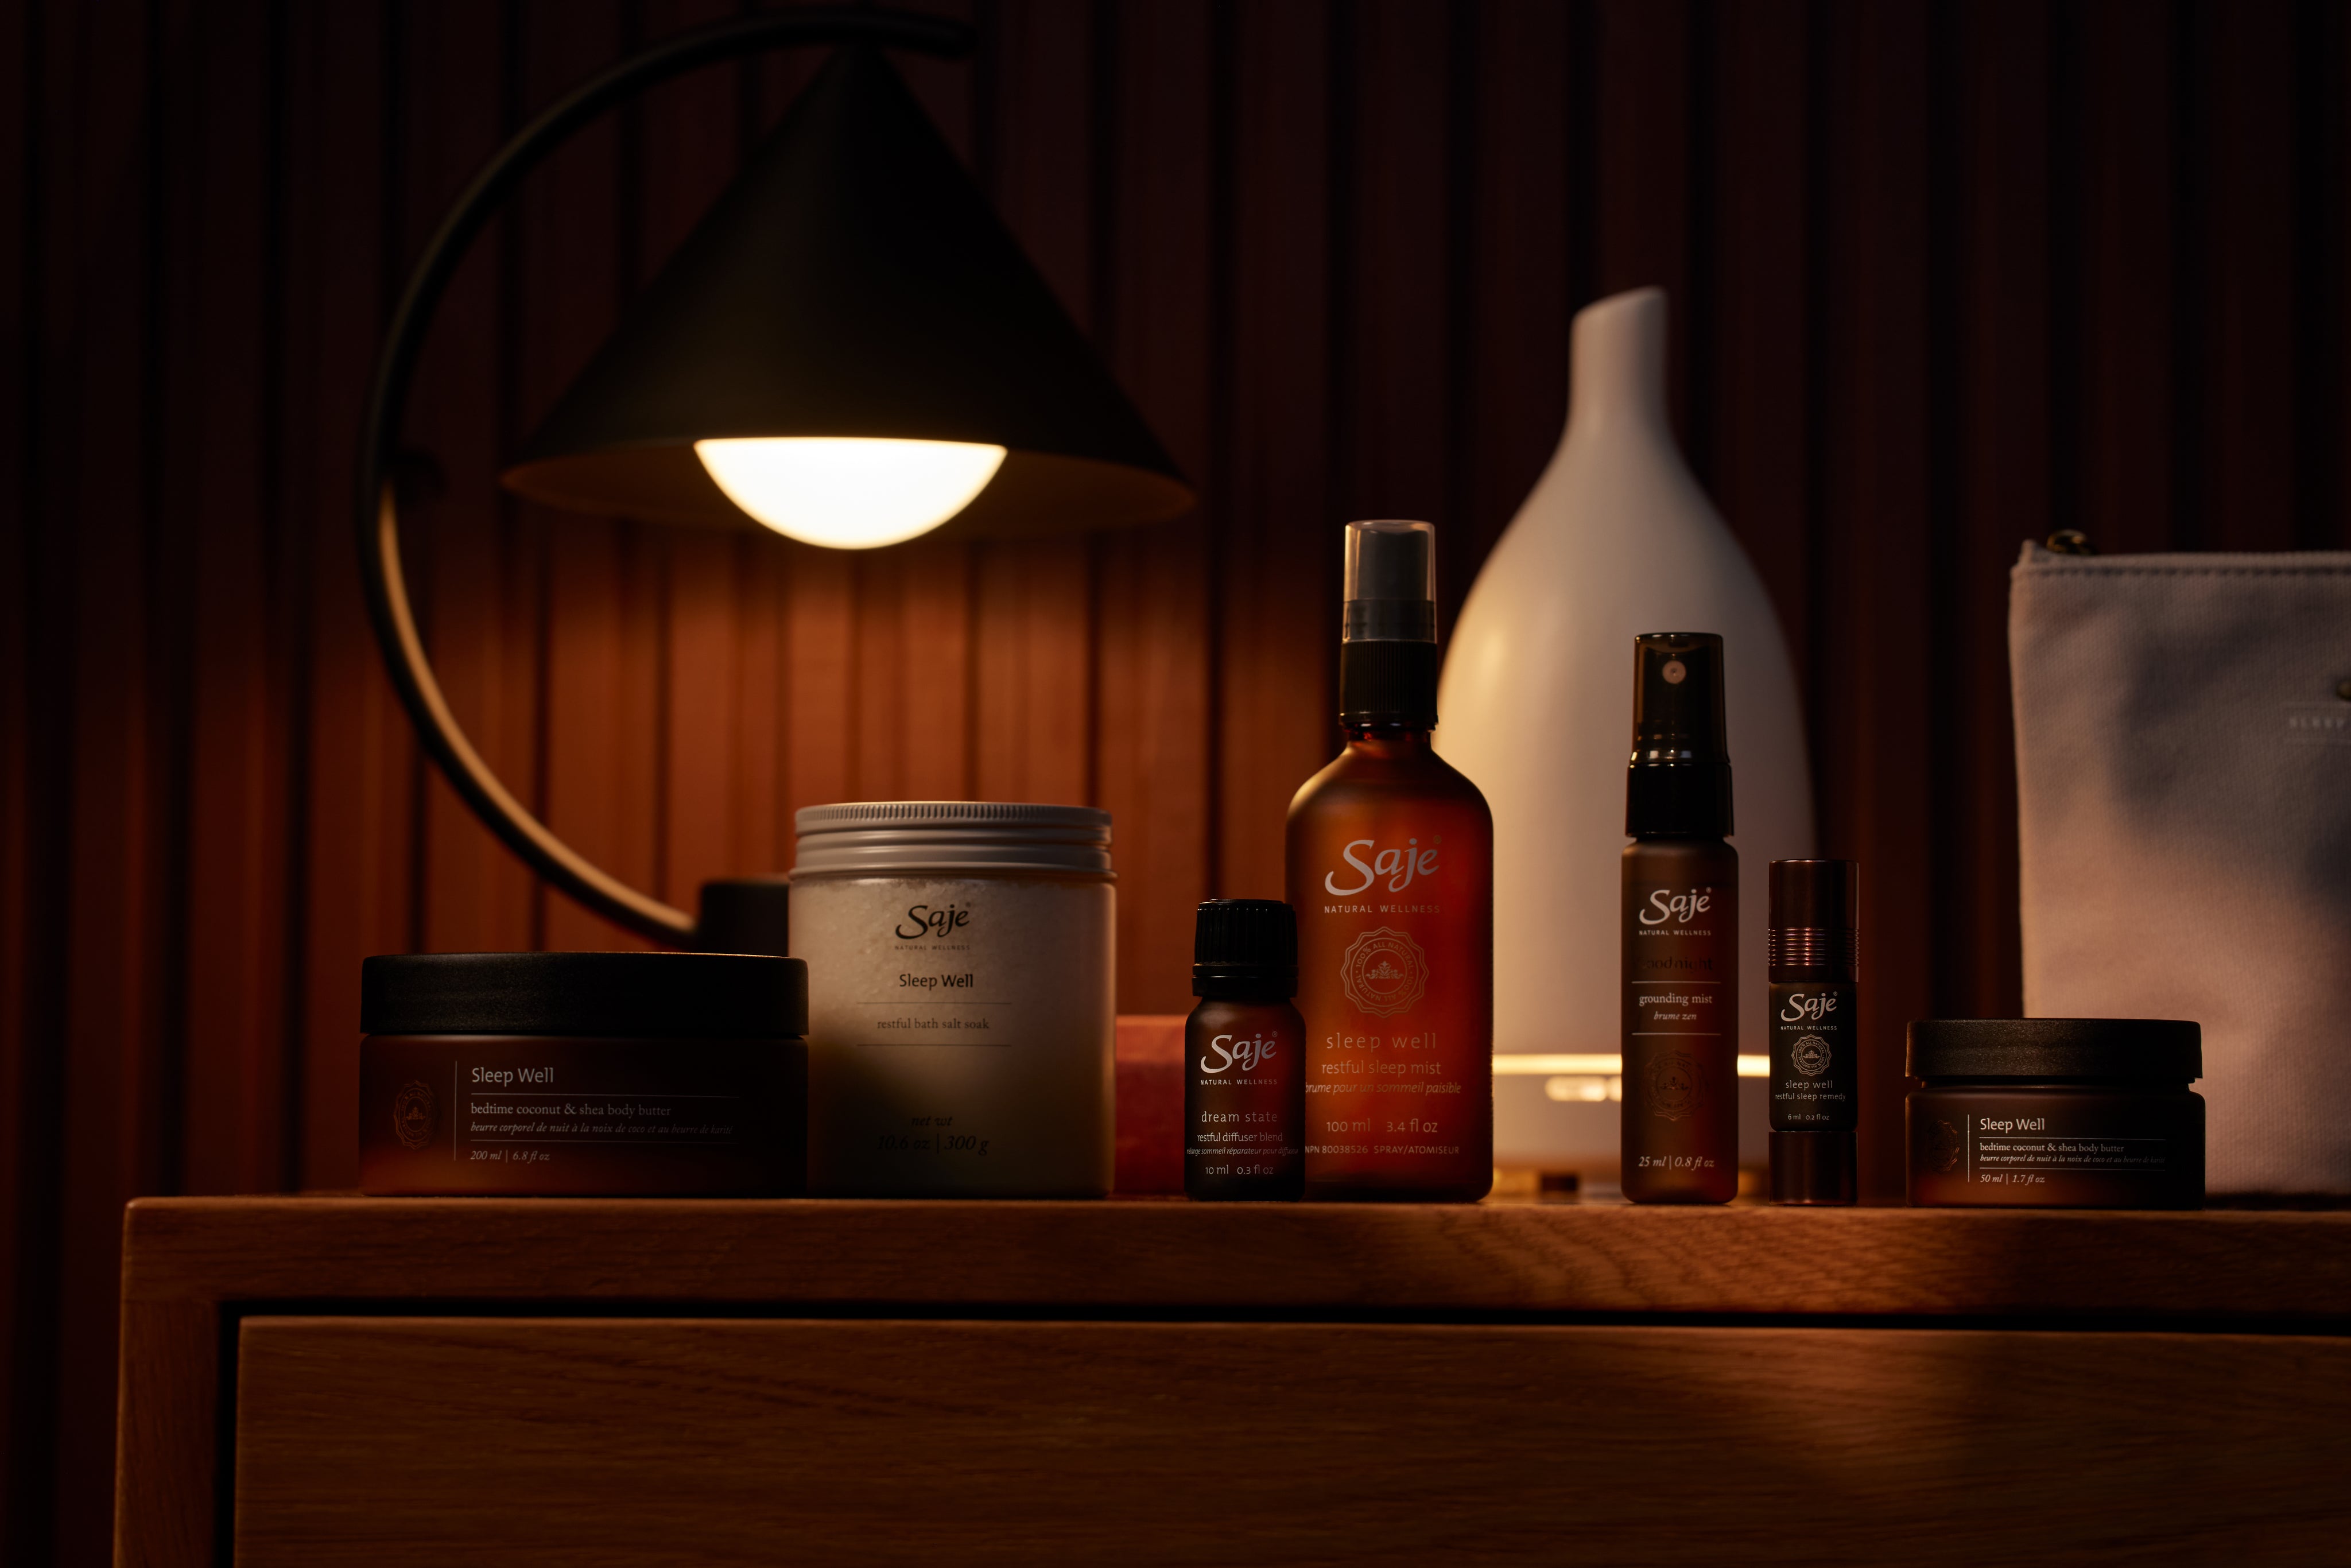 Sleep well products on a wooden table against a dim background